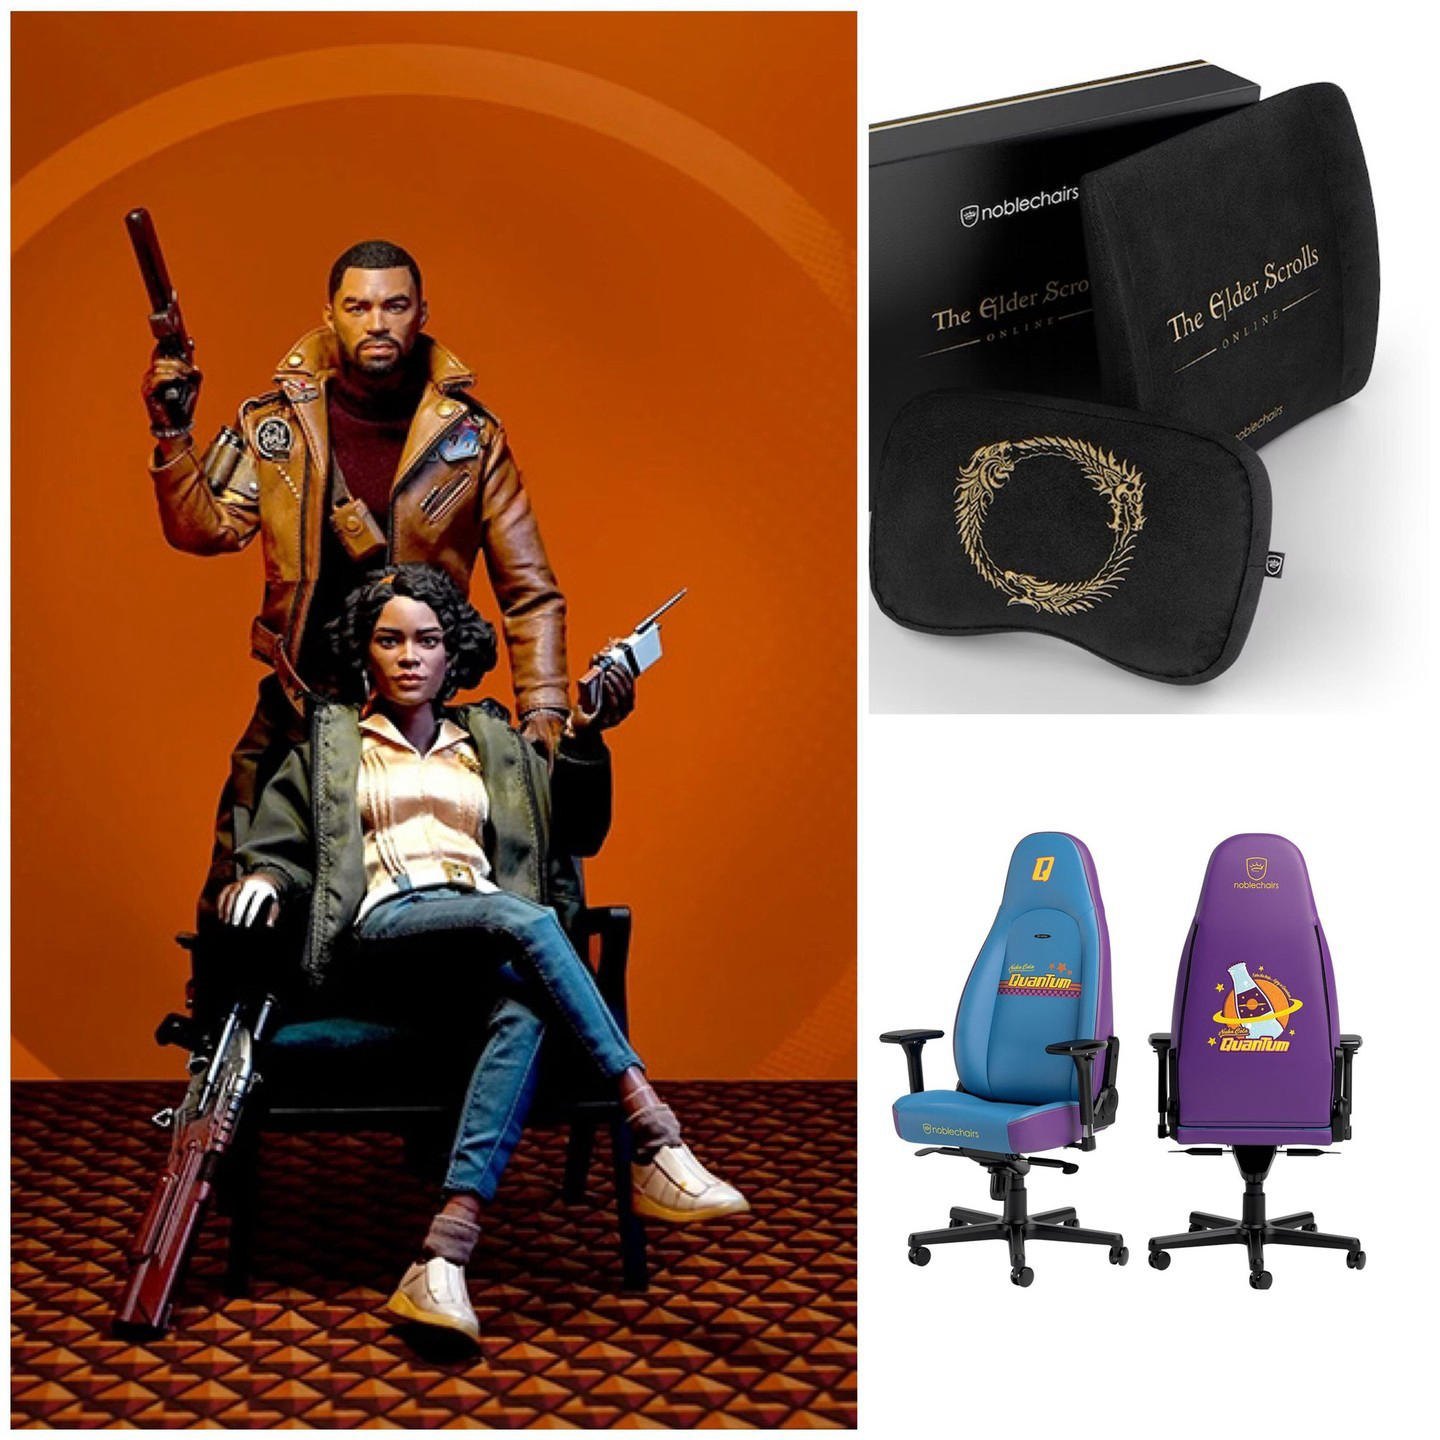 Bethesda Softworks - Get ahead of your gift-giving for the holidays with our Gift Guide